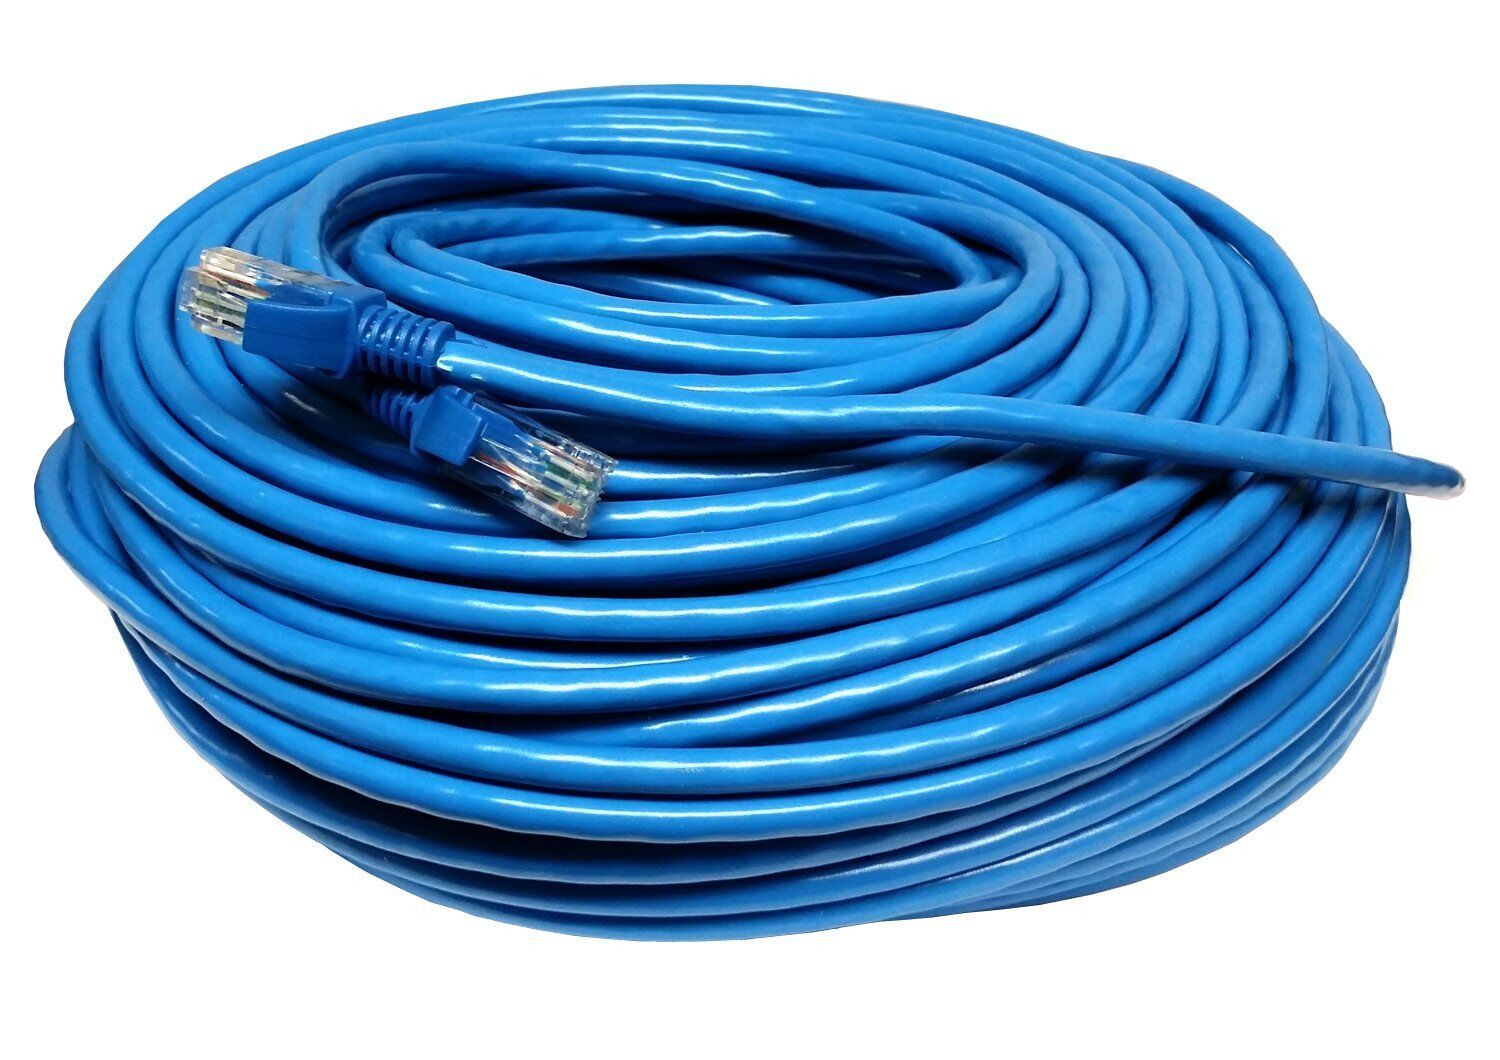 2 X 50\' FT Feet CAT6 CAT 6 RJ45 Ethernet Network LAN Patch Cable Cord  - Blue